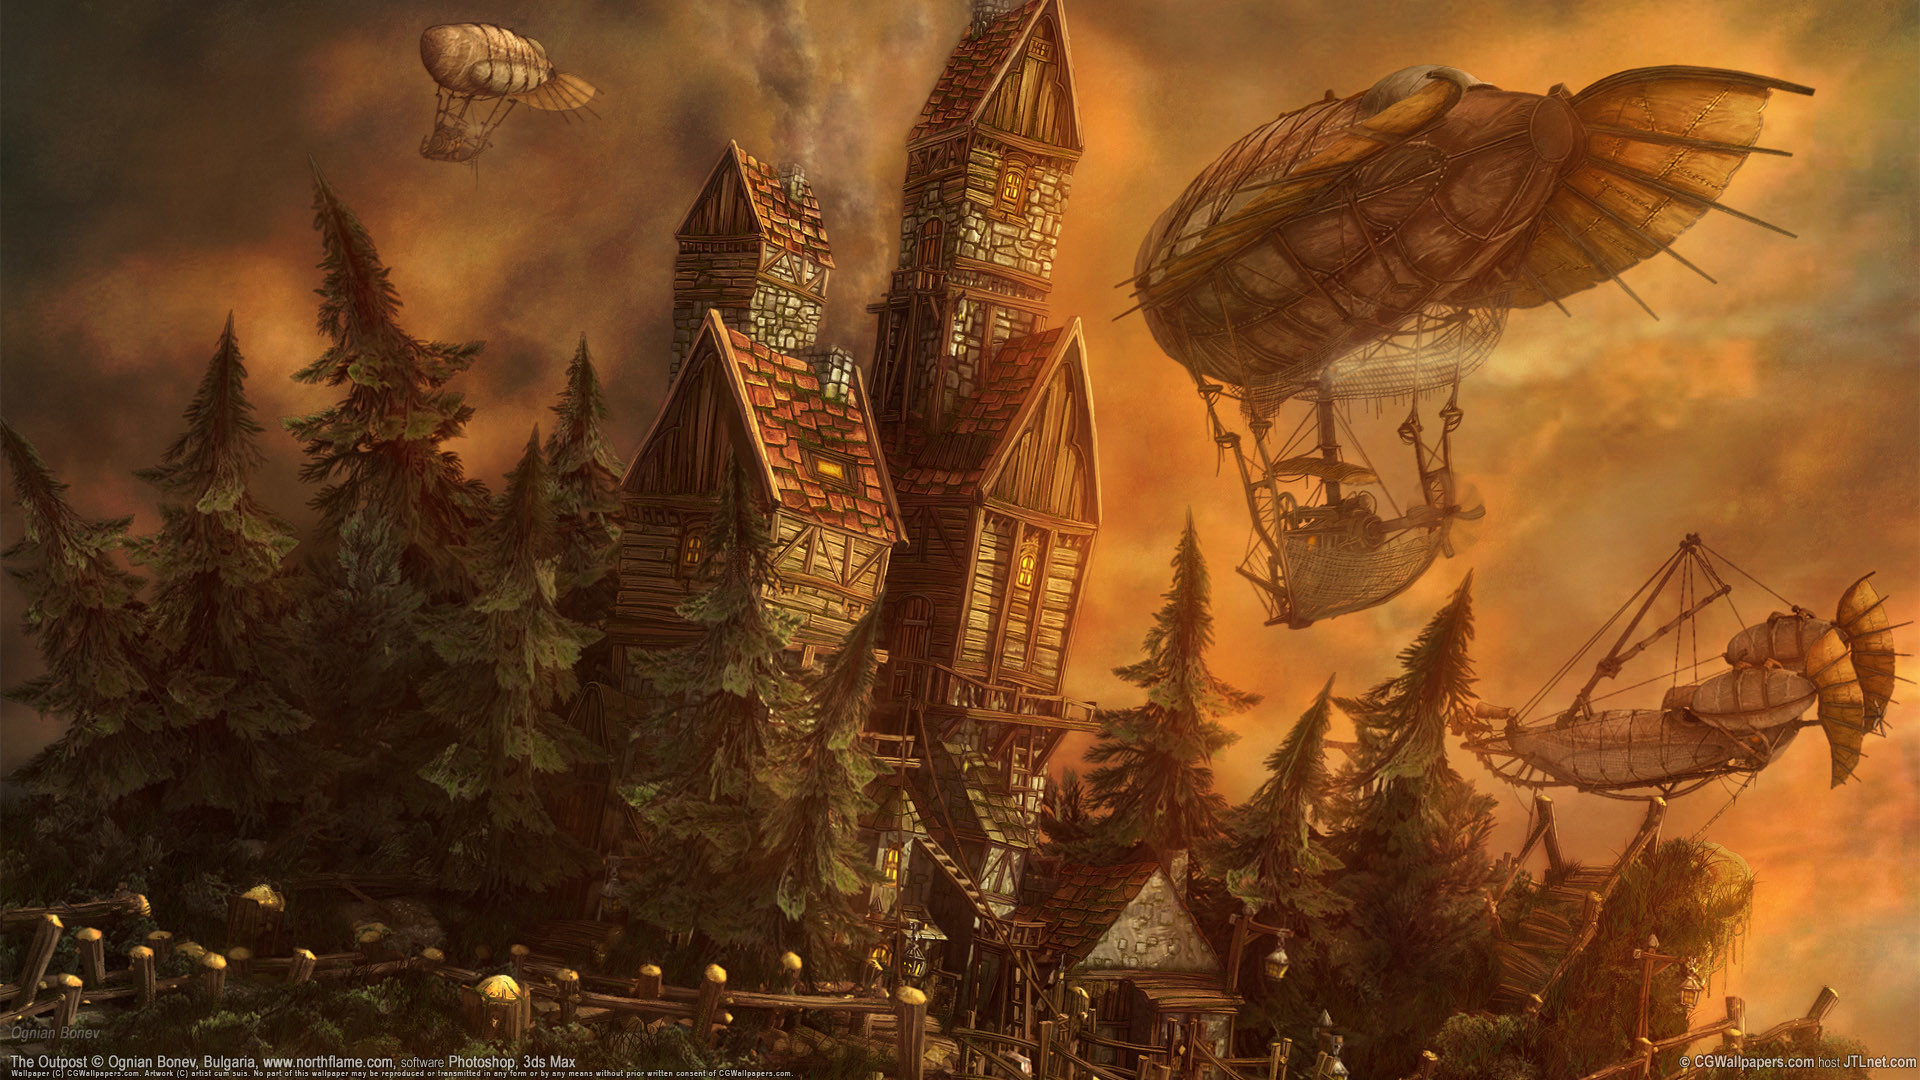 1920x1080 Wallpaper airship, steampunk, dirigible, The Outpost.